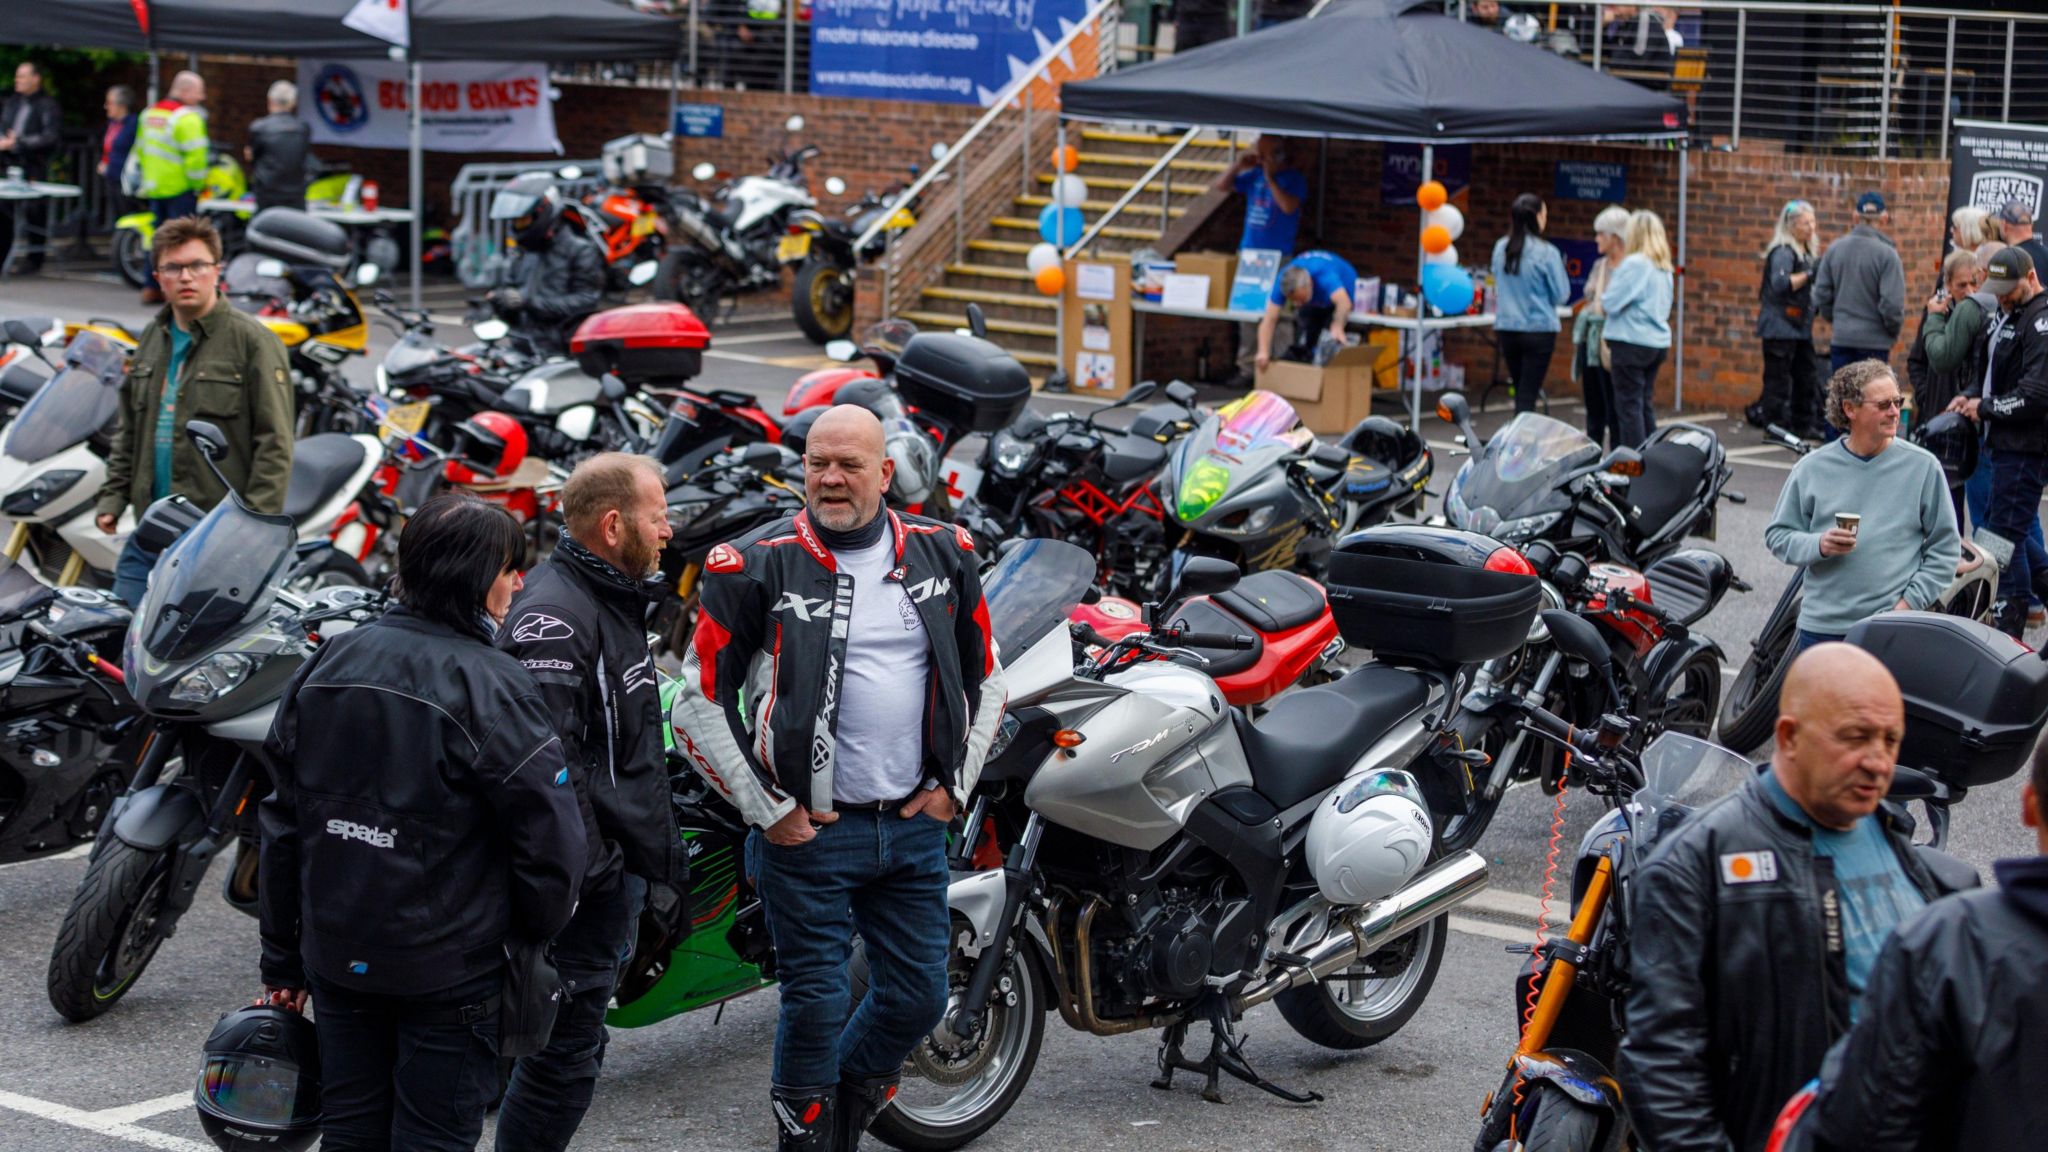 People stand in the main car park at Fowlers in Bristol. Many of them are wearing motorbike leathers and there are several motorbikes on display